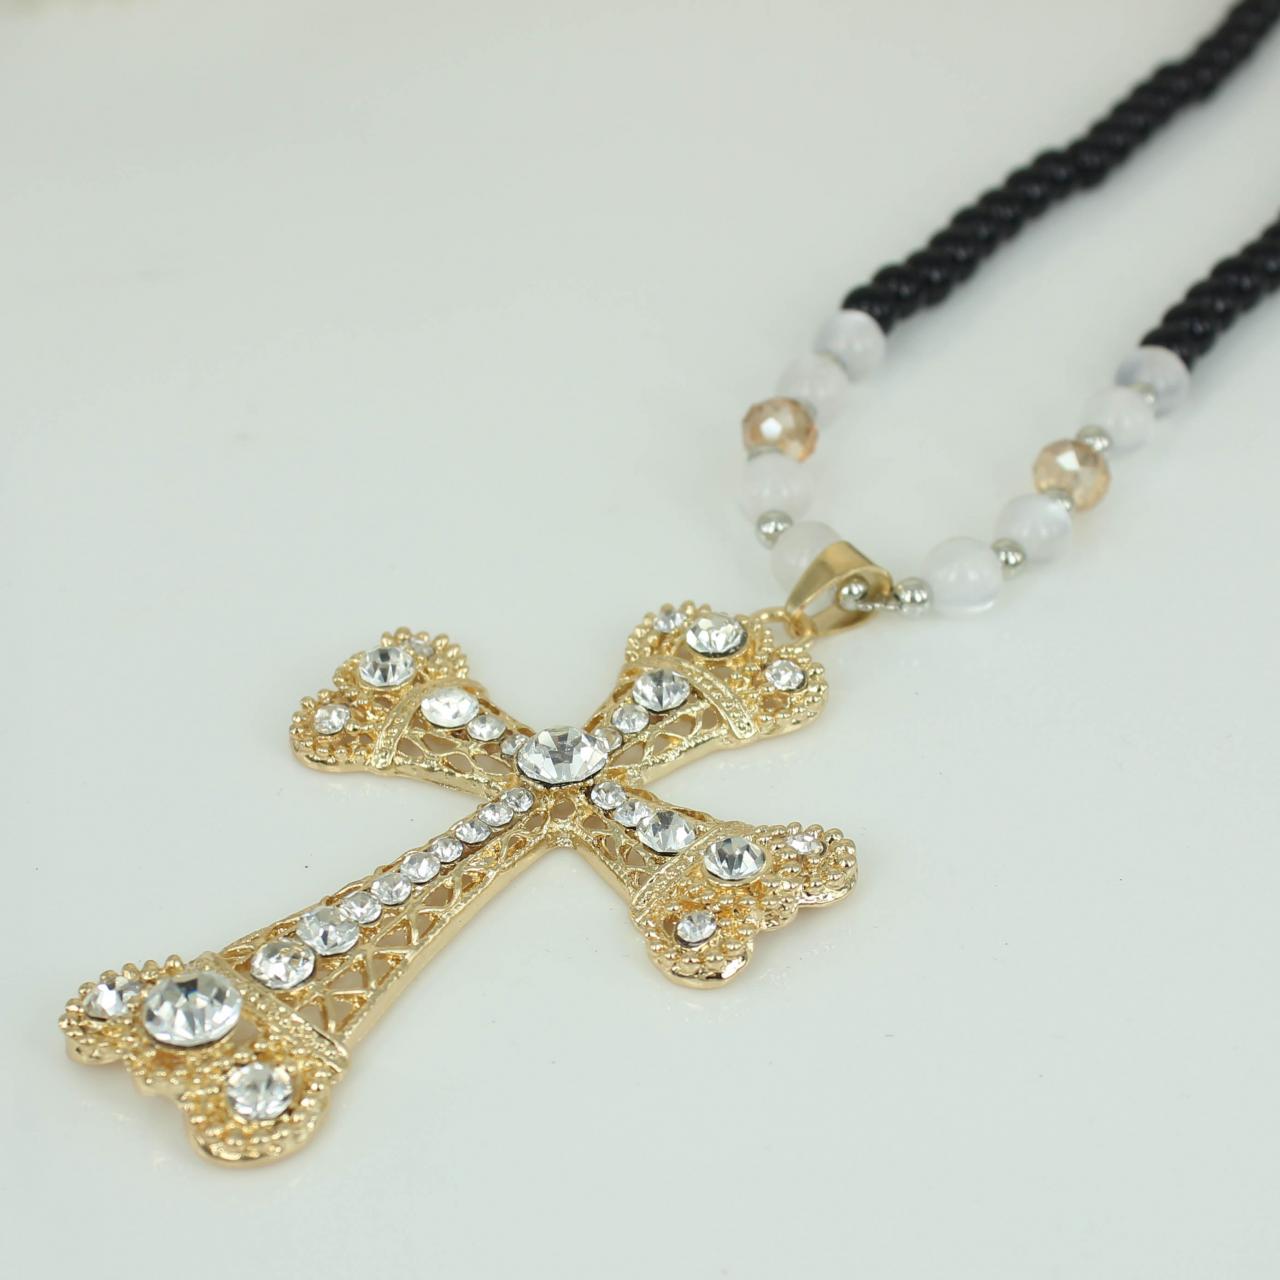 Fashion Cross Necklace Cross With Crystal Necklace Gift, Good Accessory For Men And Women